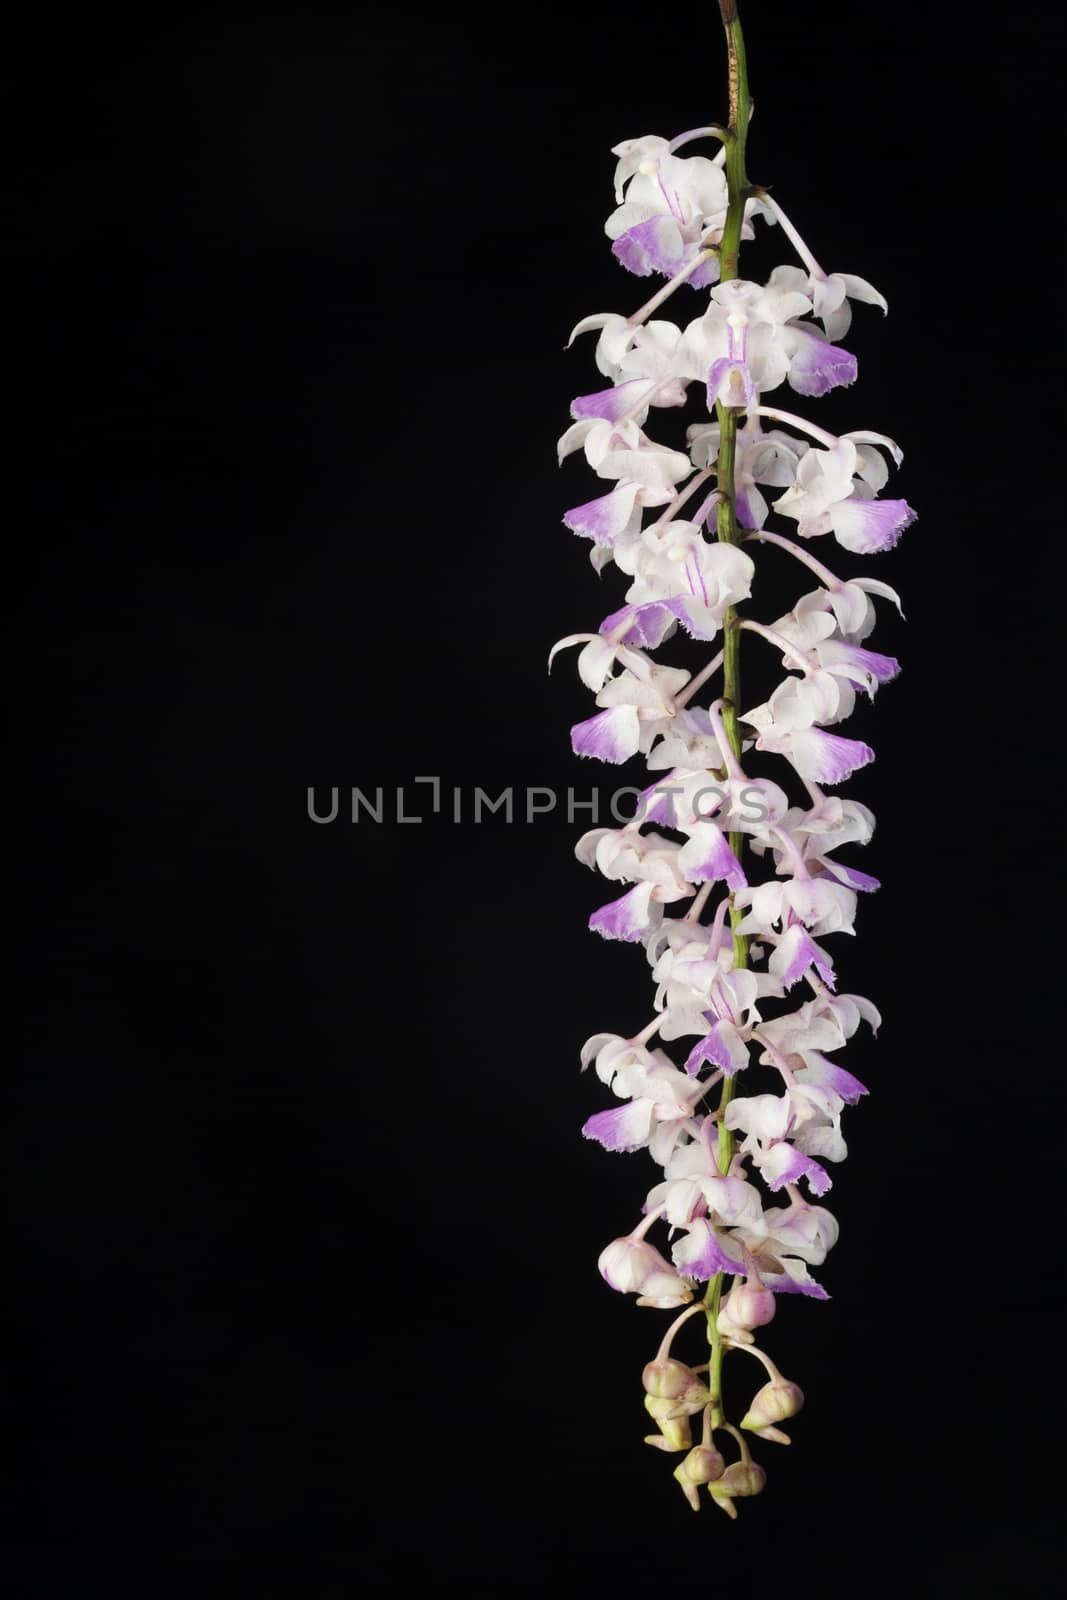 Orchids on black by jee1999